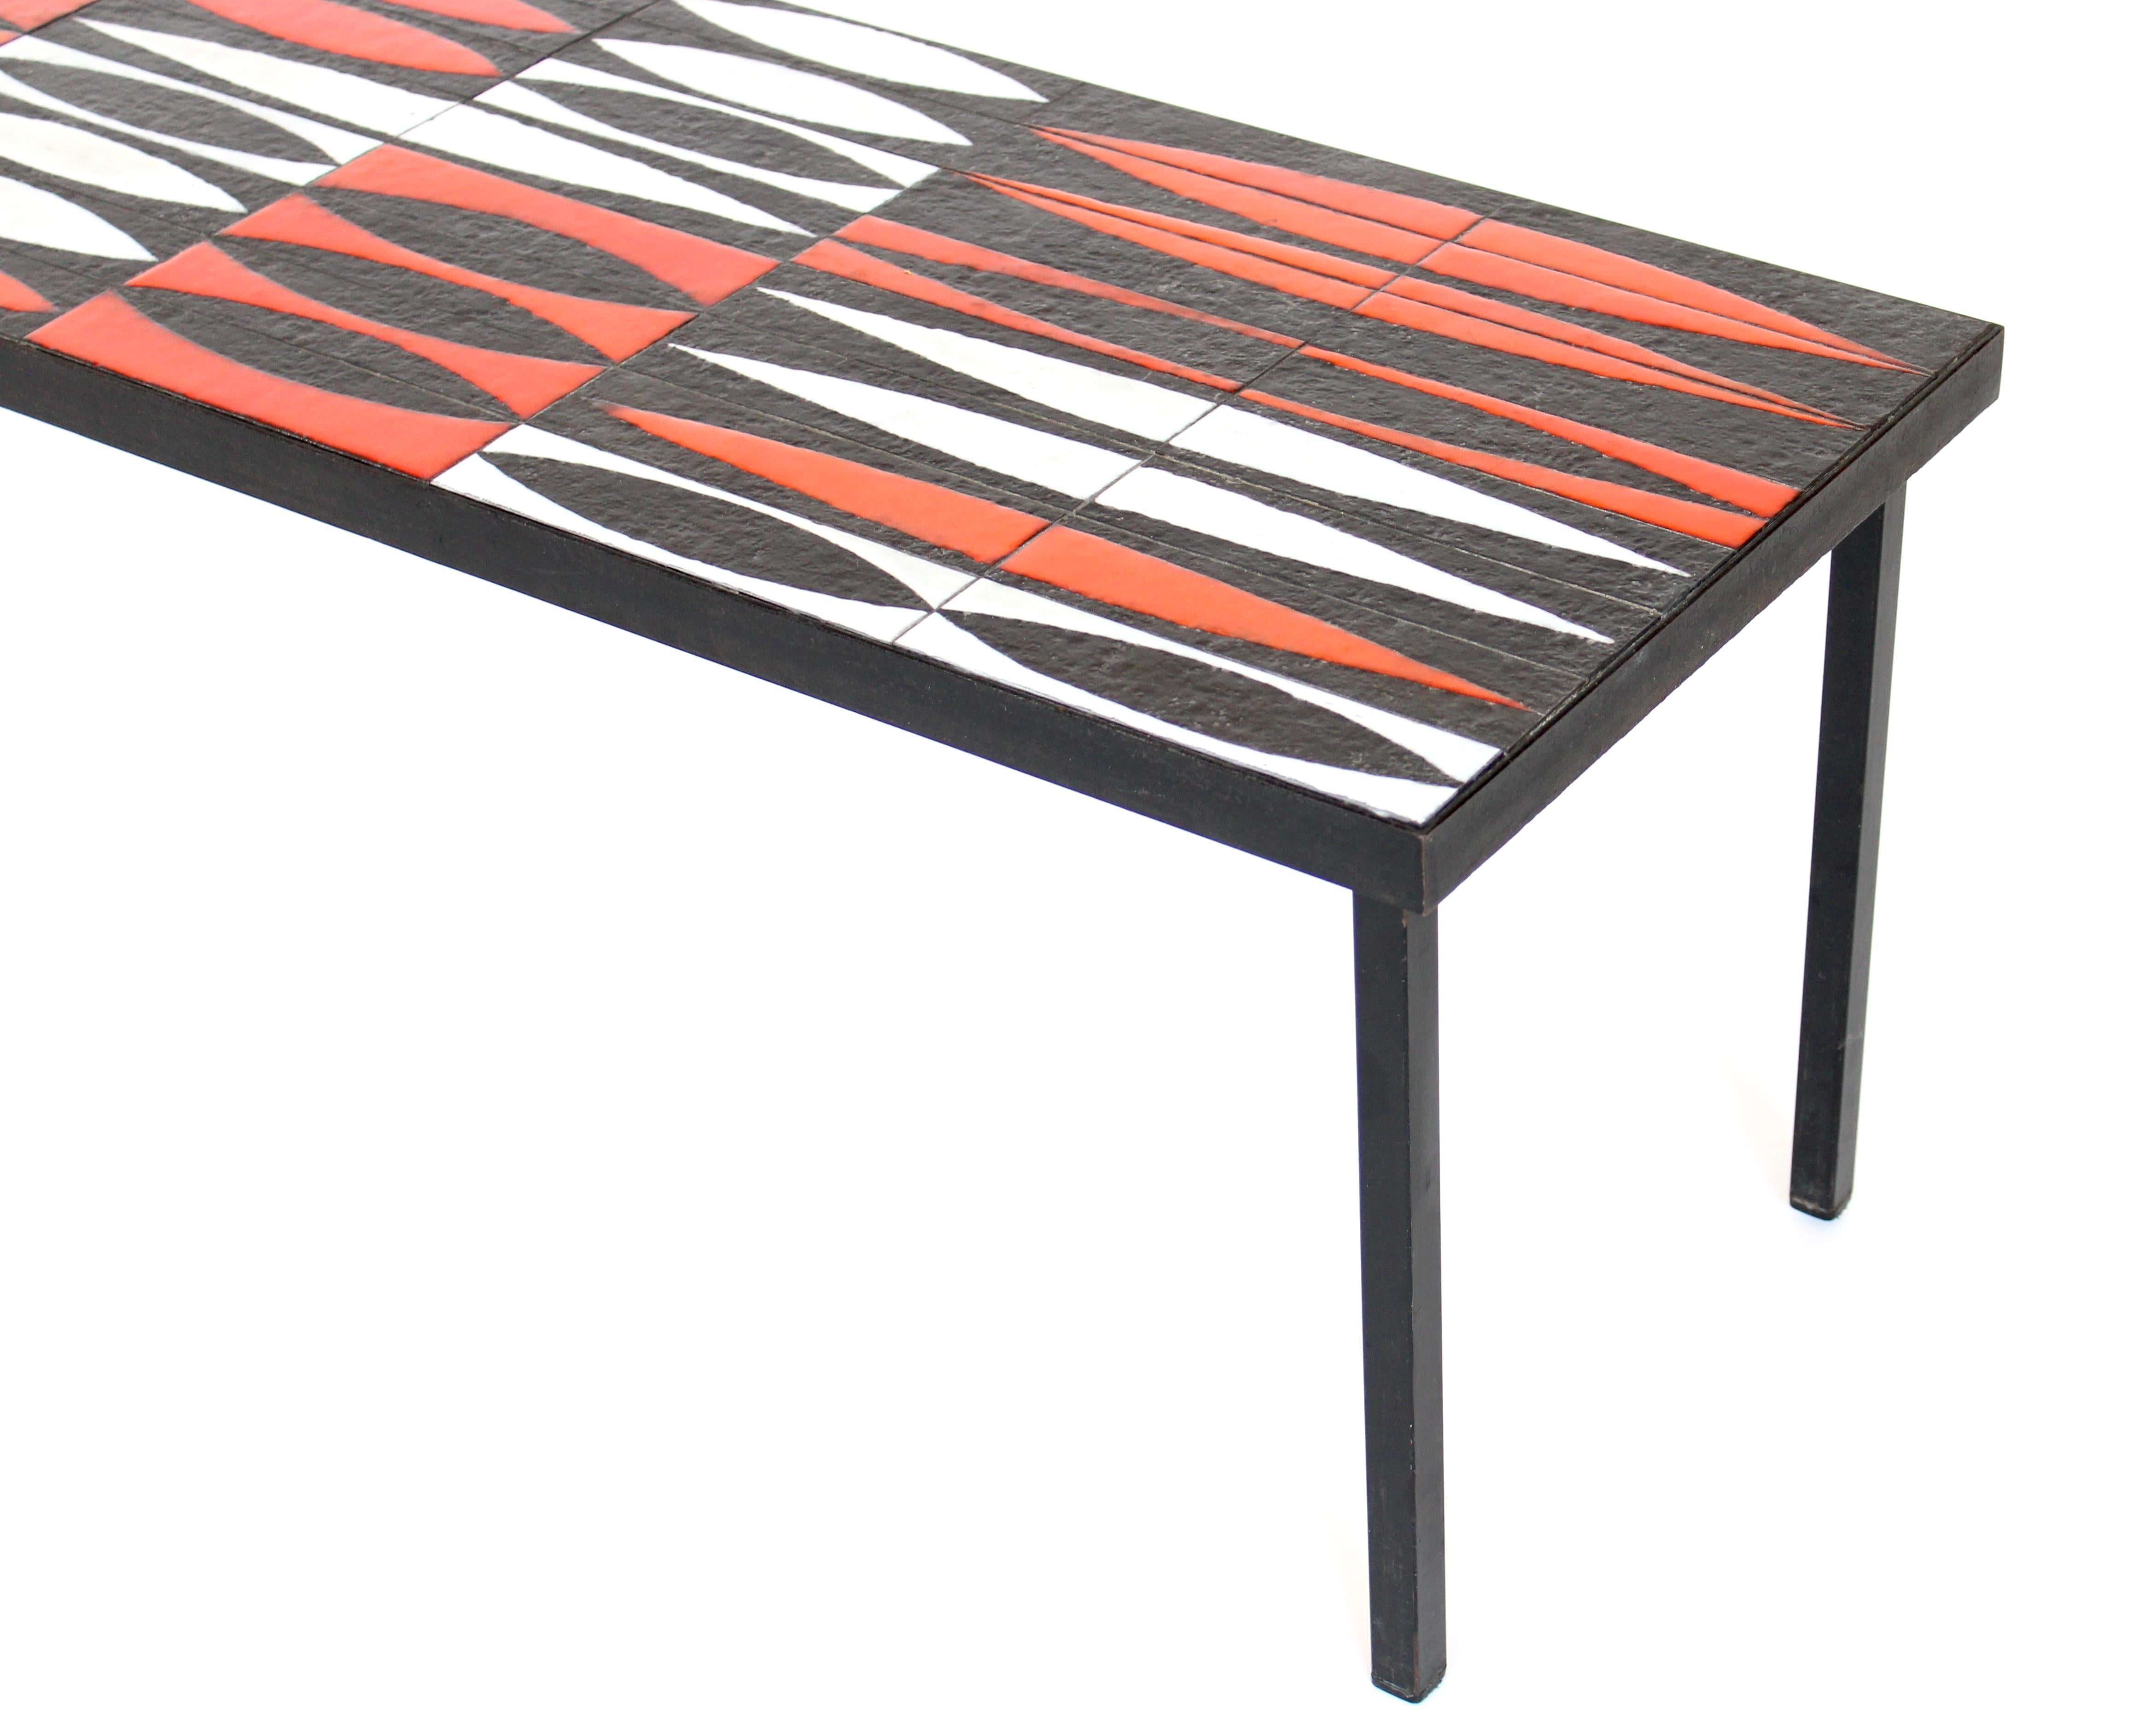 Roger Capron Navette Red, Orange, Black and White French Ceramic Coffee Table 4